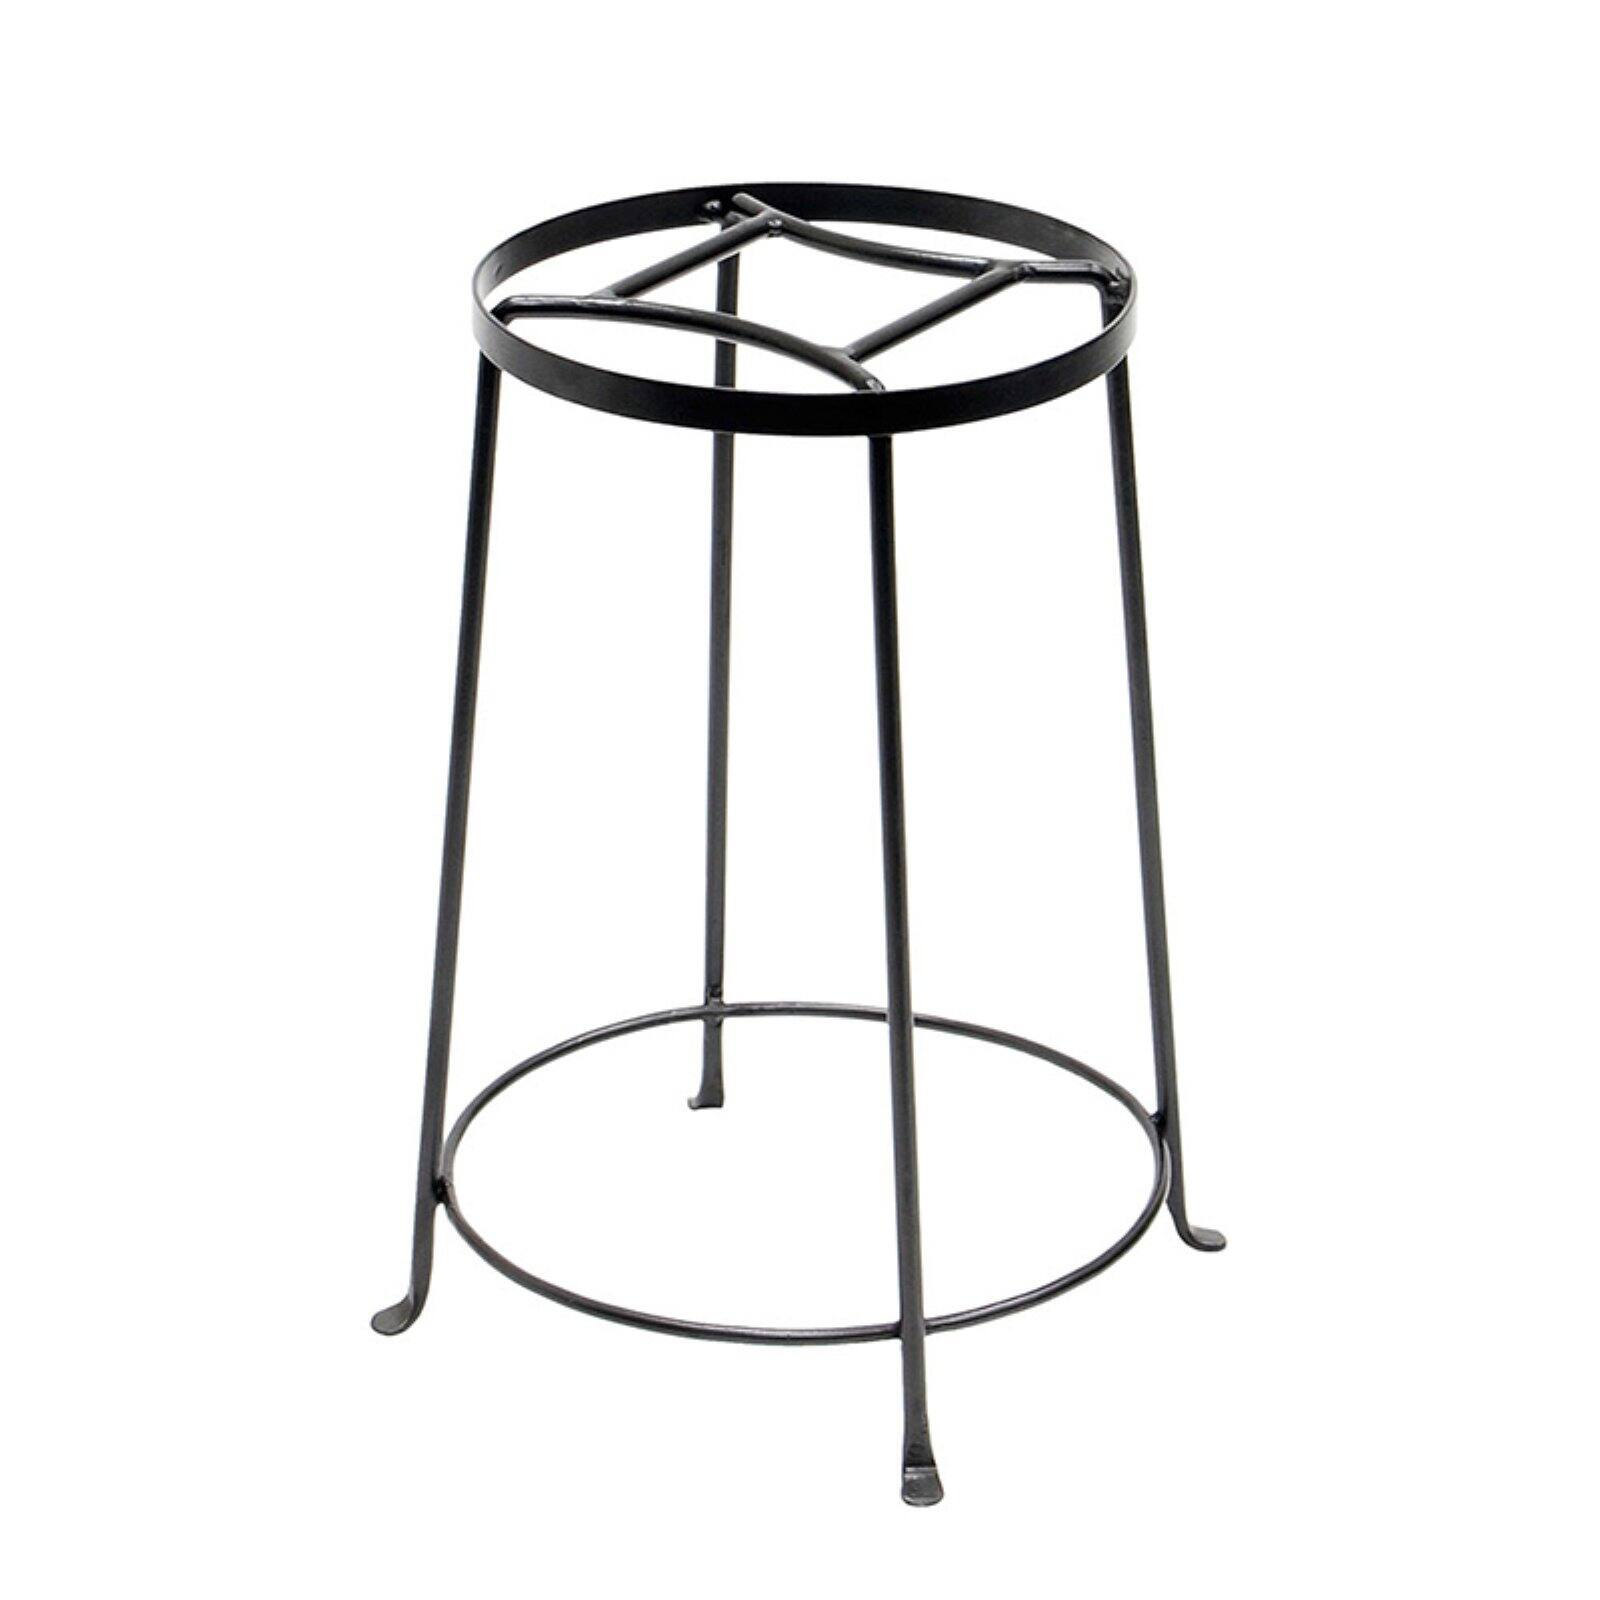 Achla Designs Argyle Indoor/Outdoor Plant Stand - image 1 of 2